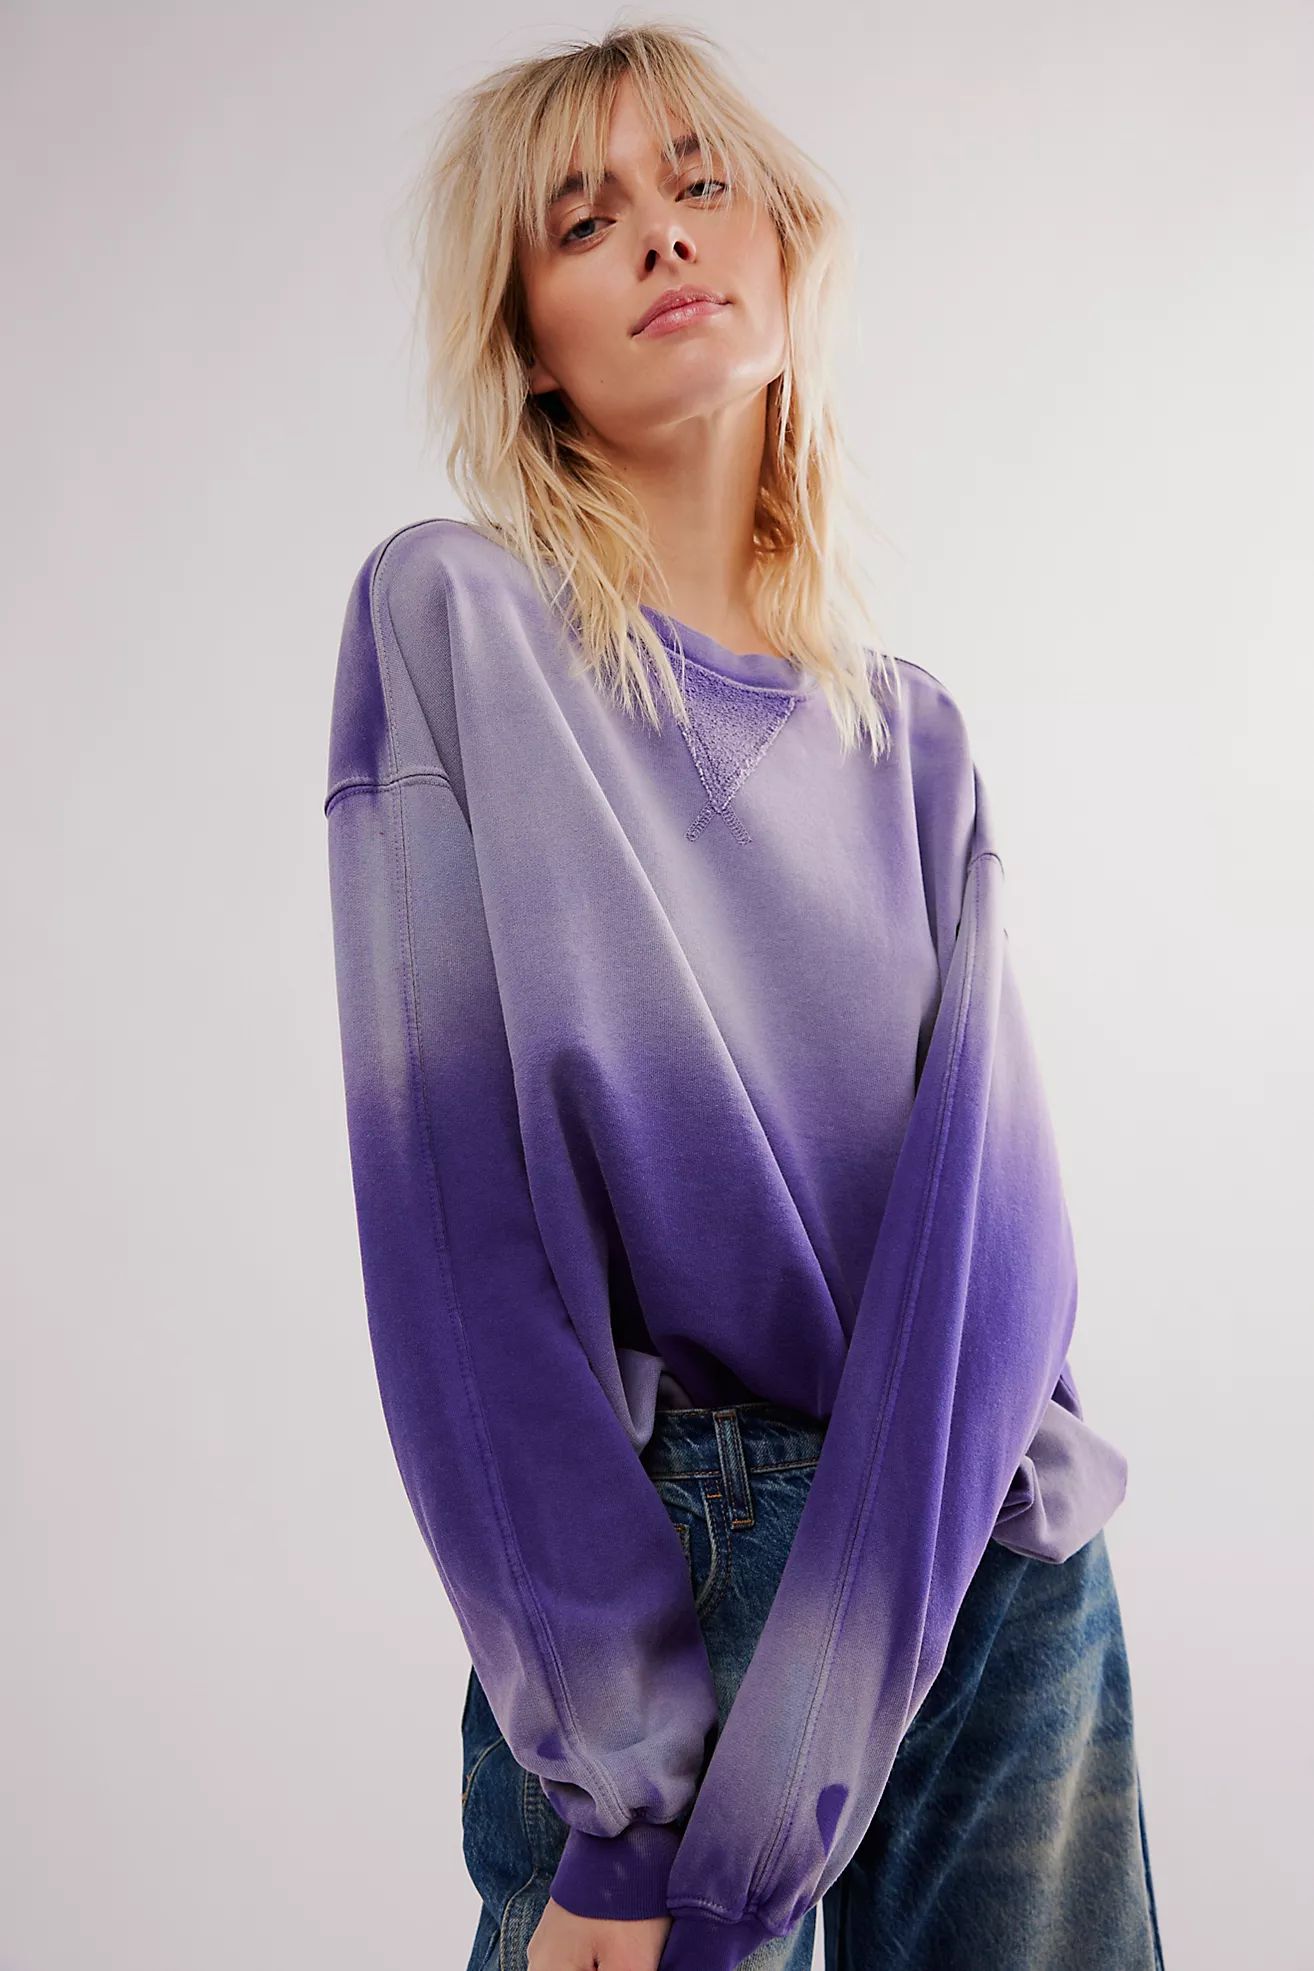 Over And Out Sweatshirt | Free People (Global - UK&FR Excluded)